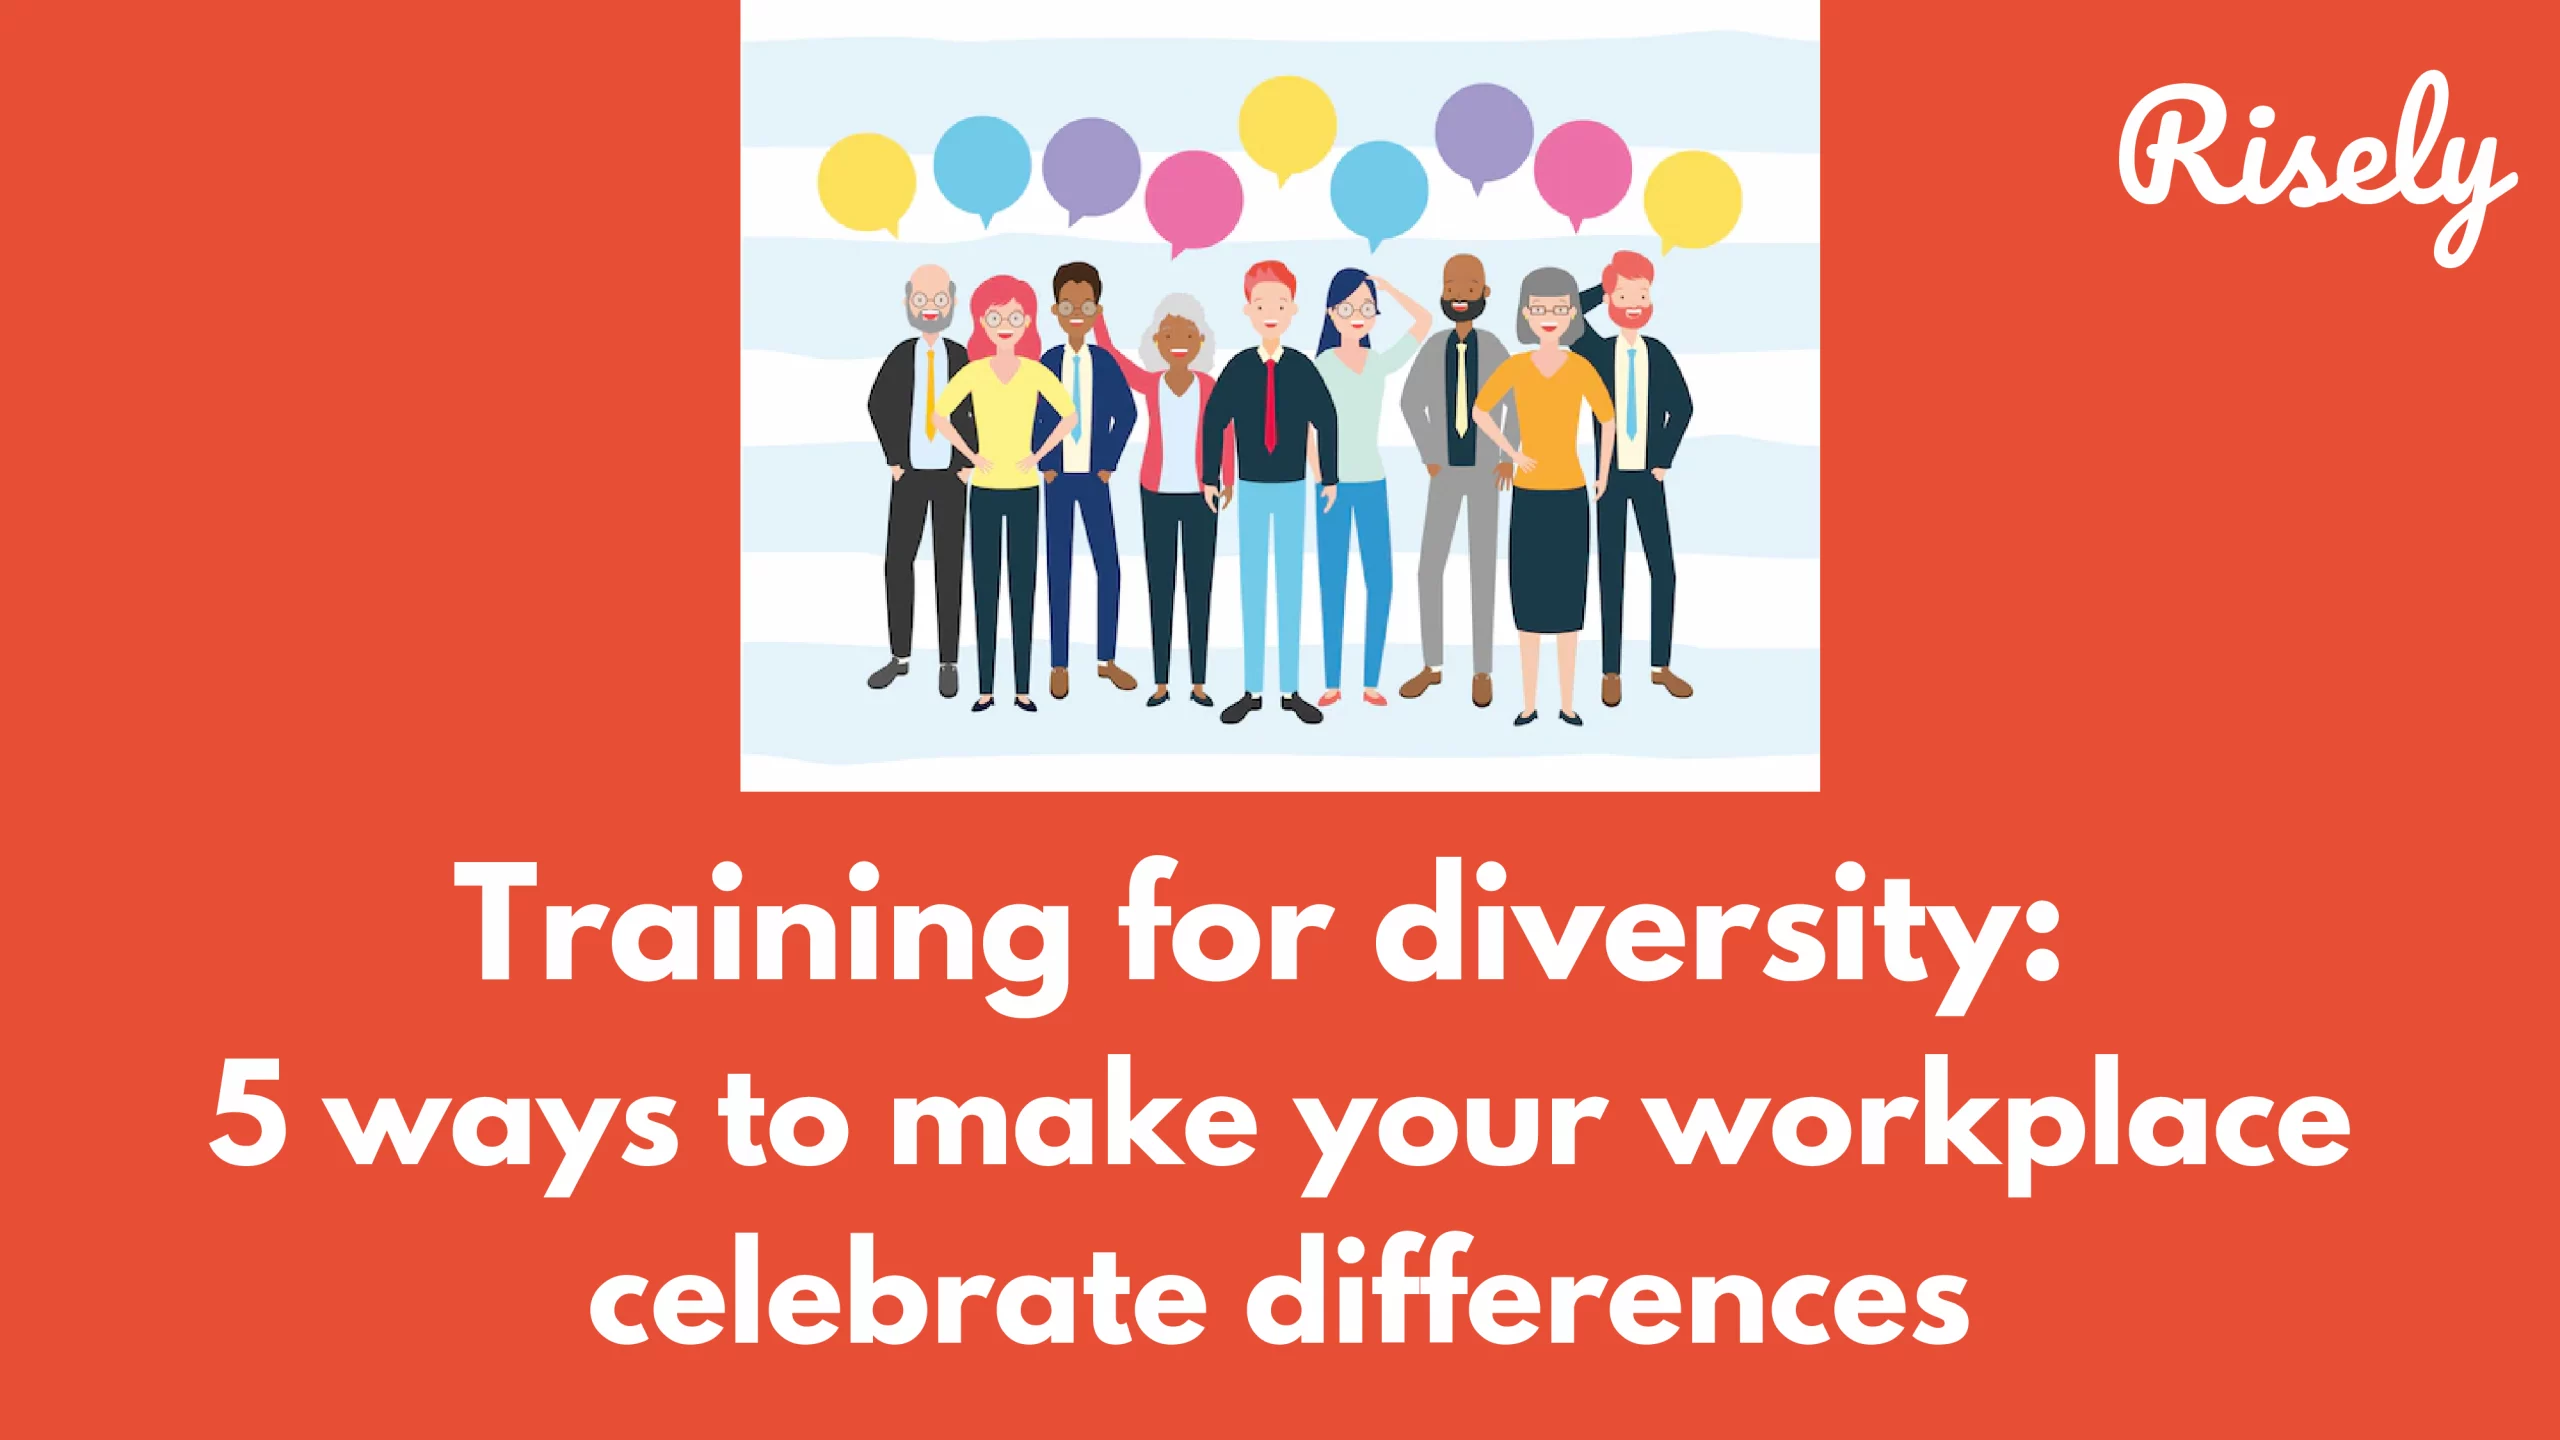 Training for diversity: 5 ways to make your workplace celebrate differences